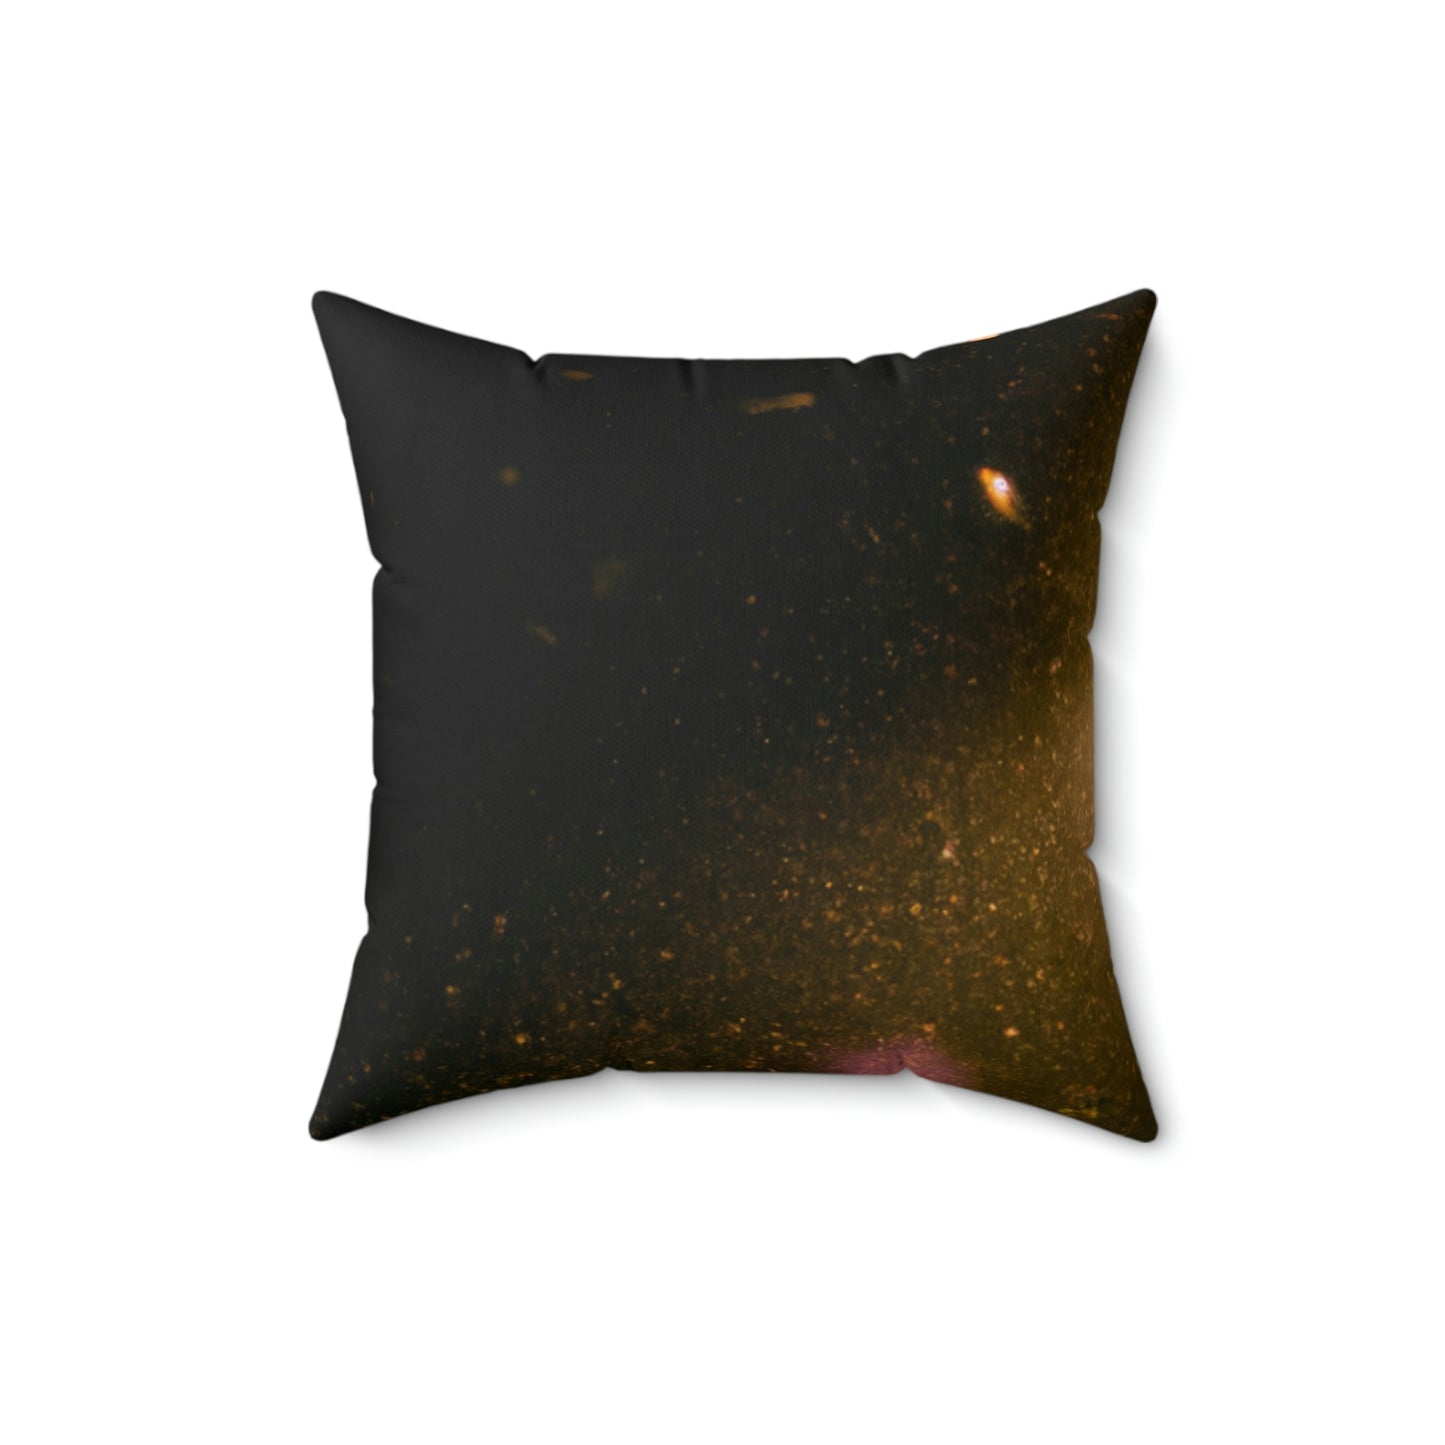 Winter's Lonely Lullaby - The Alien Square Pillow